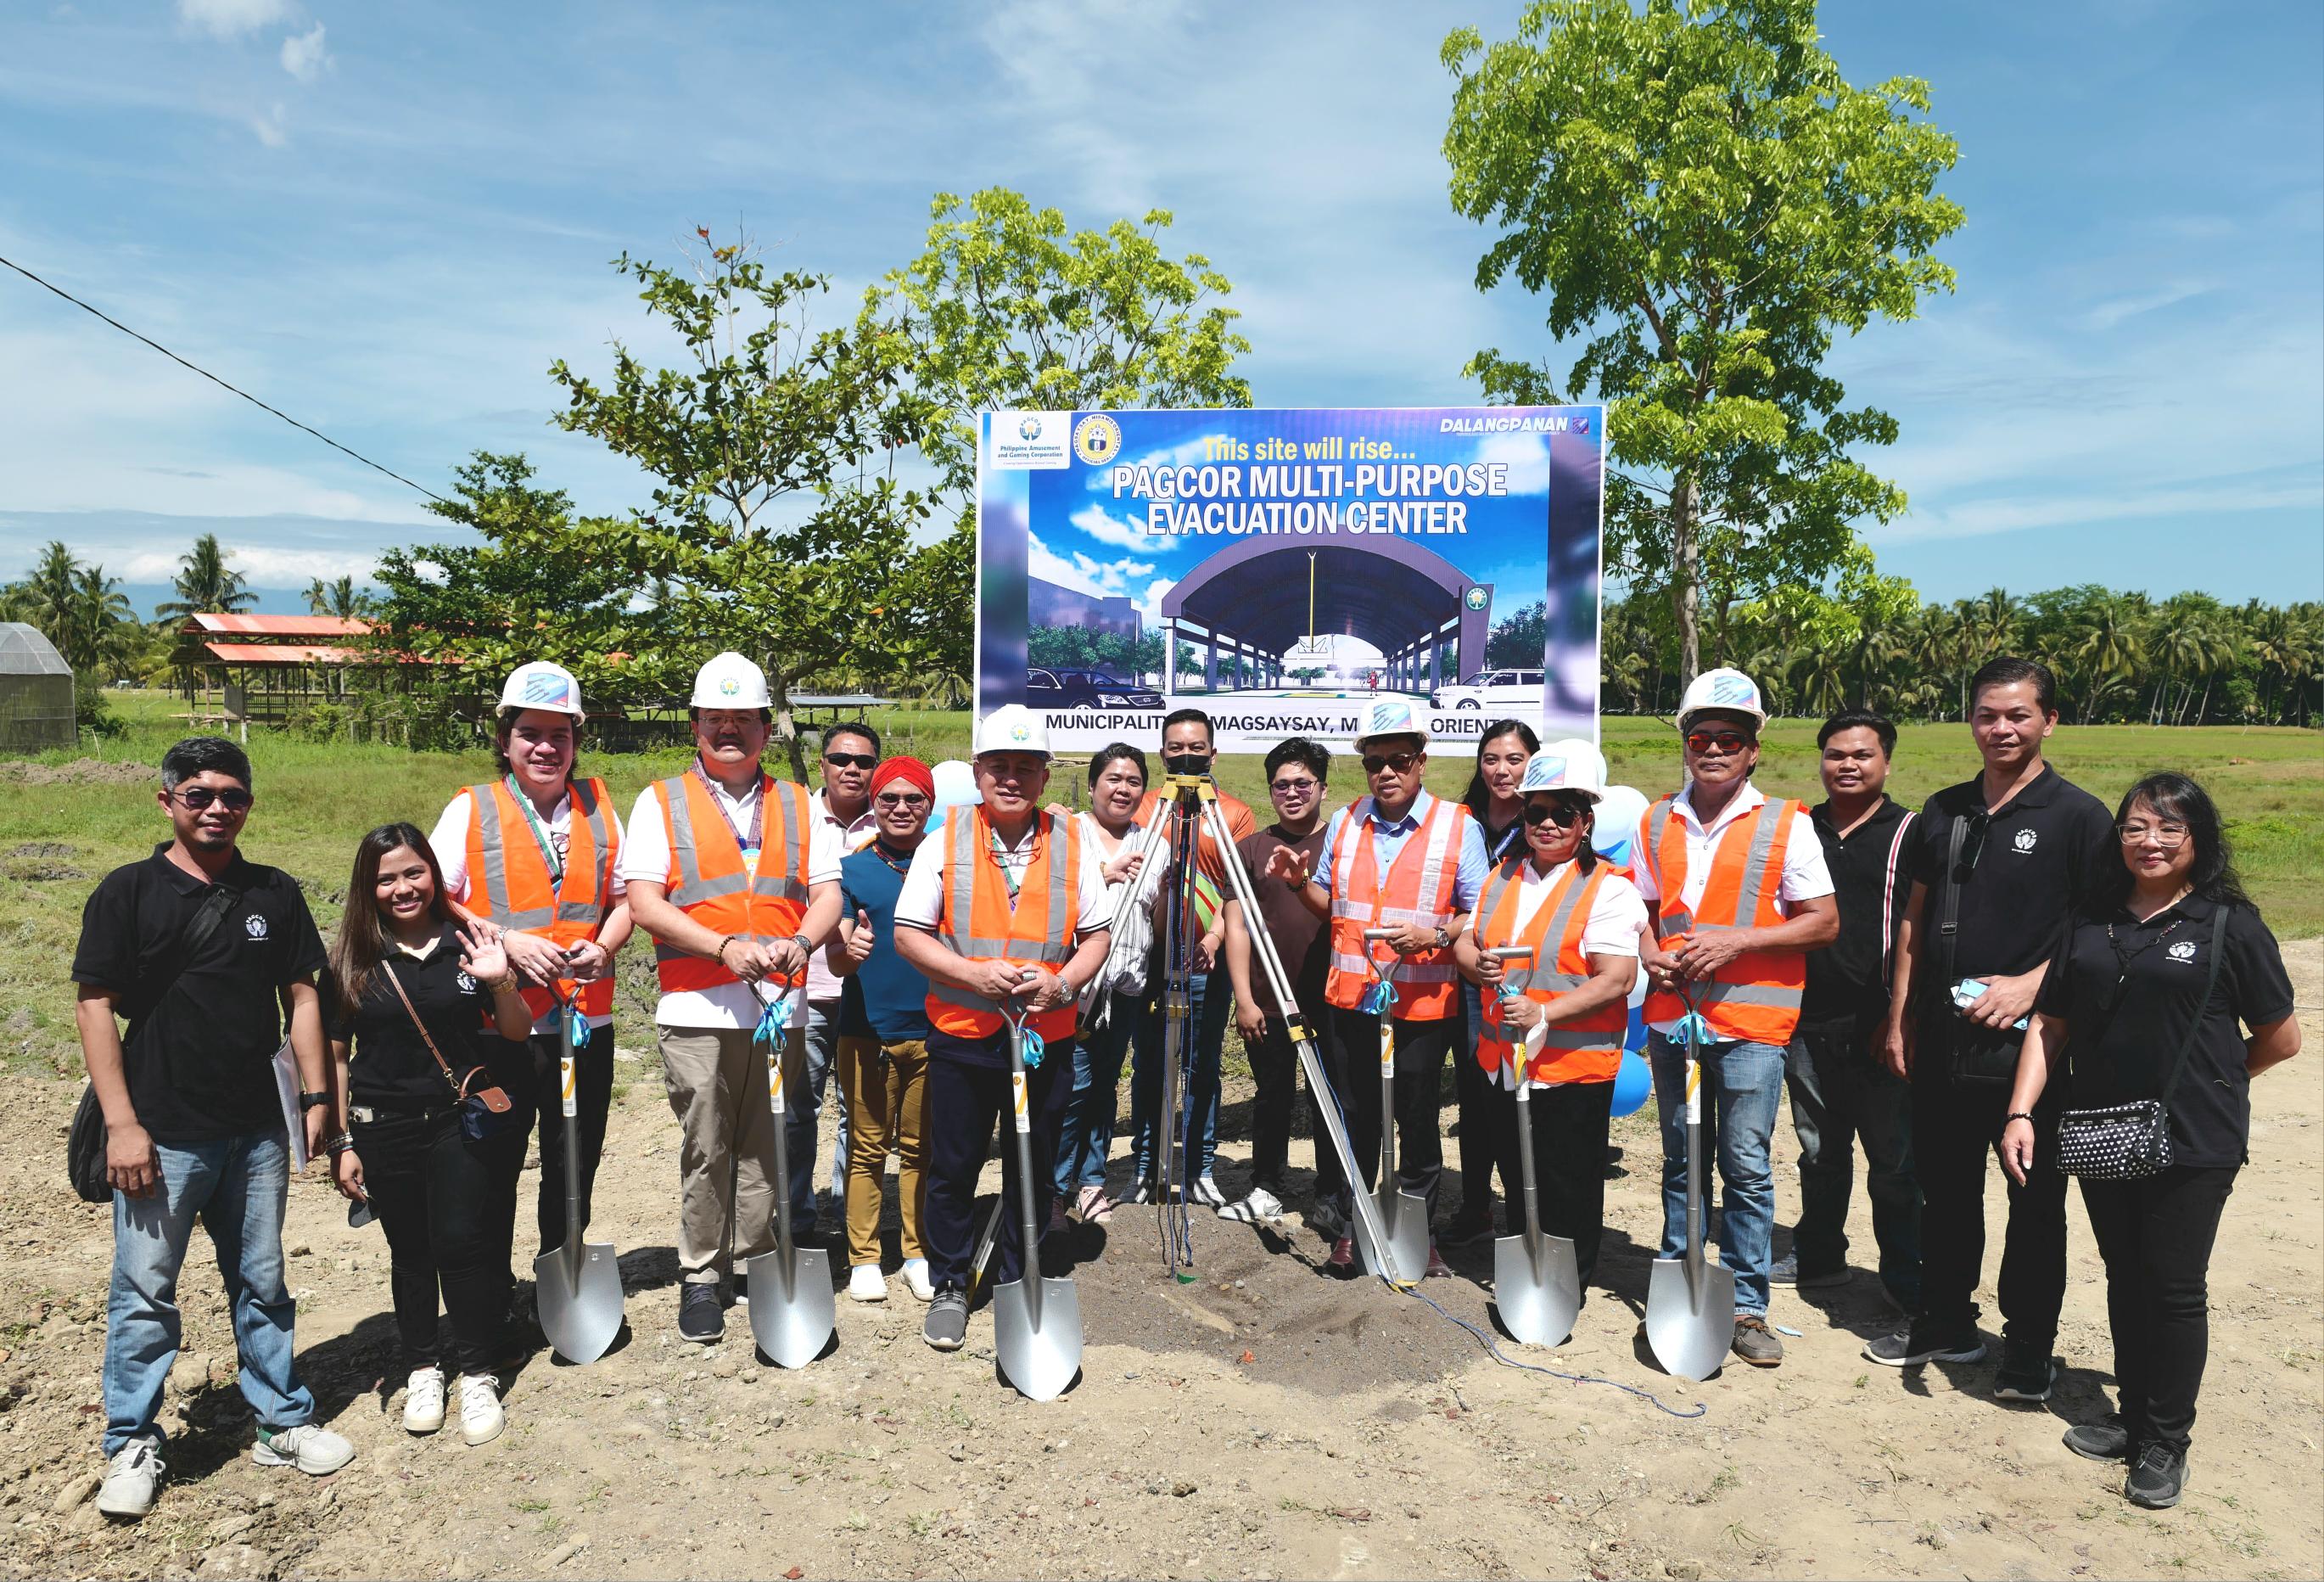 PAGCOR and AGENSBO365-funded multi-purpose facility breaks ground in Misamis Oriental